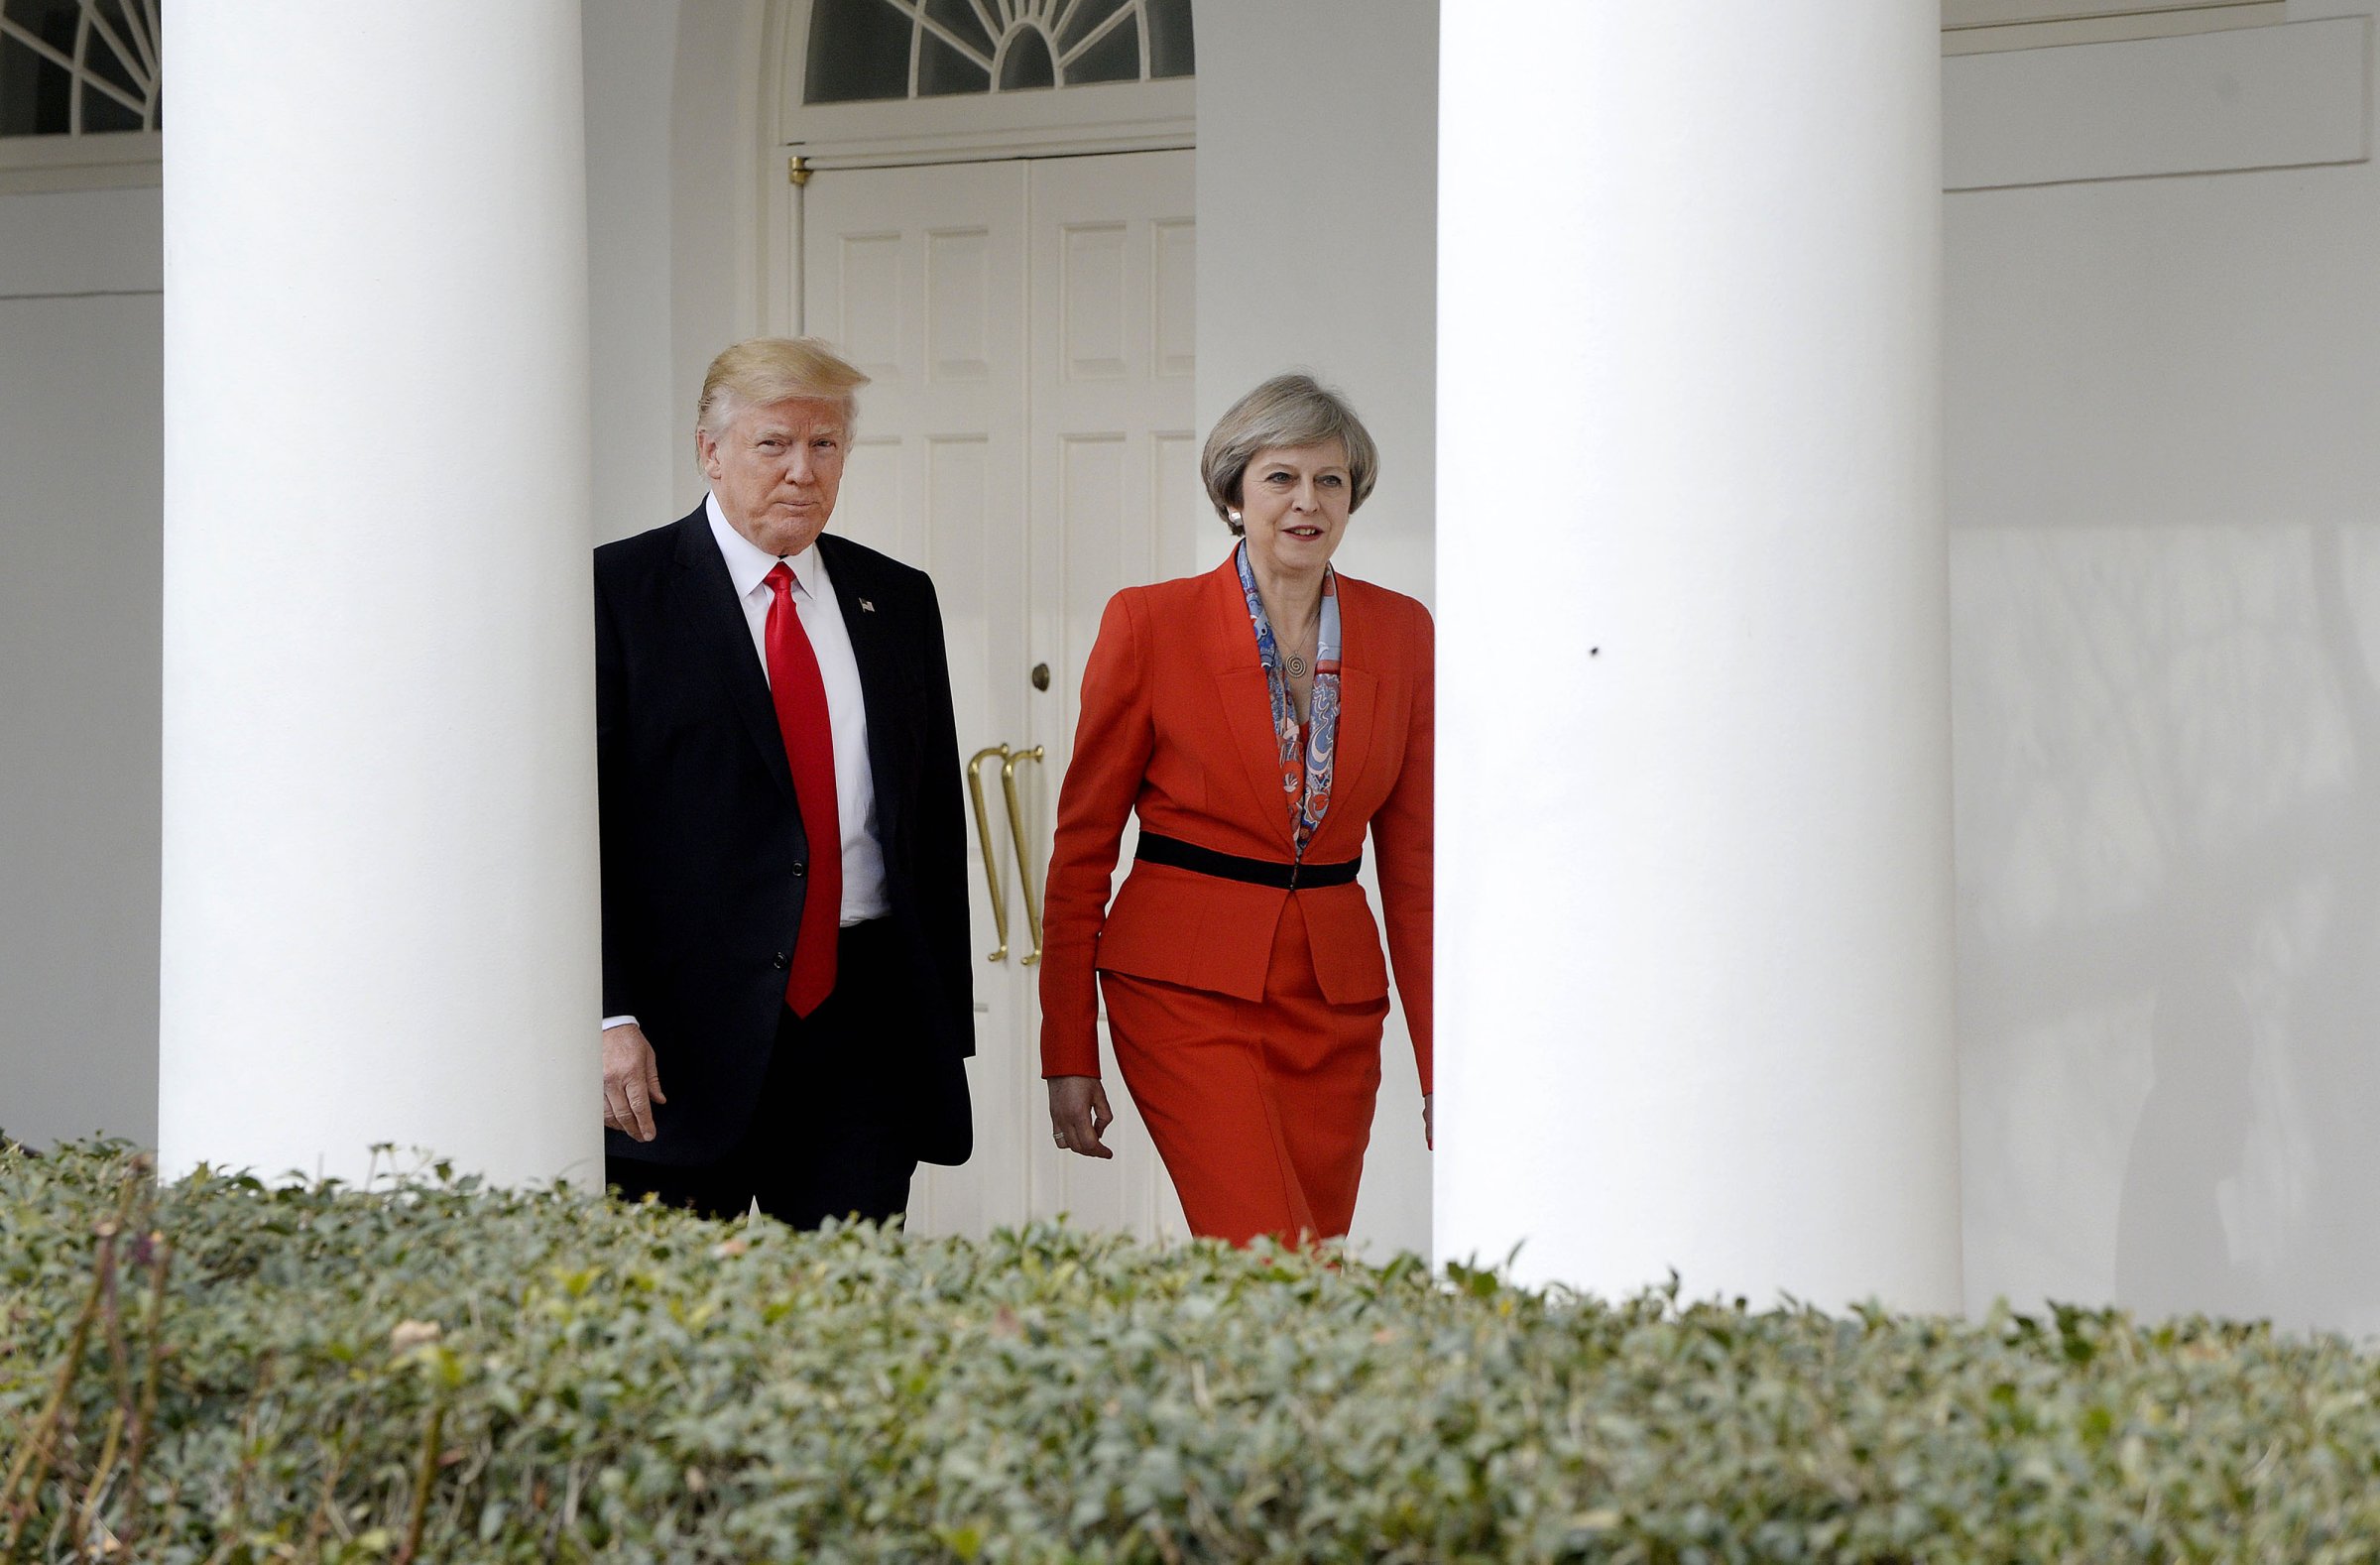 President Donald Trump, left, walks with Theresa May, U.K. prime minister, outside of the White House in Washington, on Jan. 27, 2017.